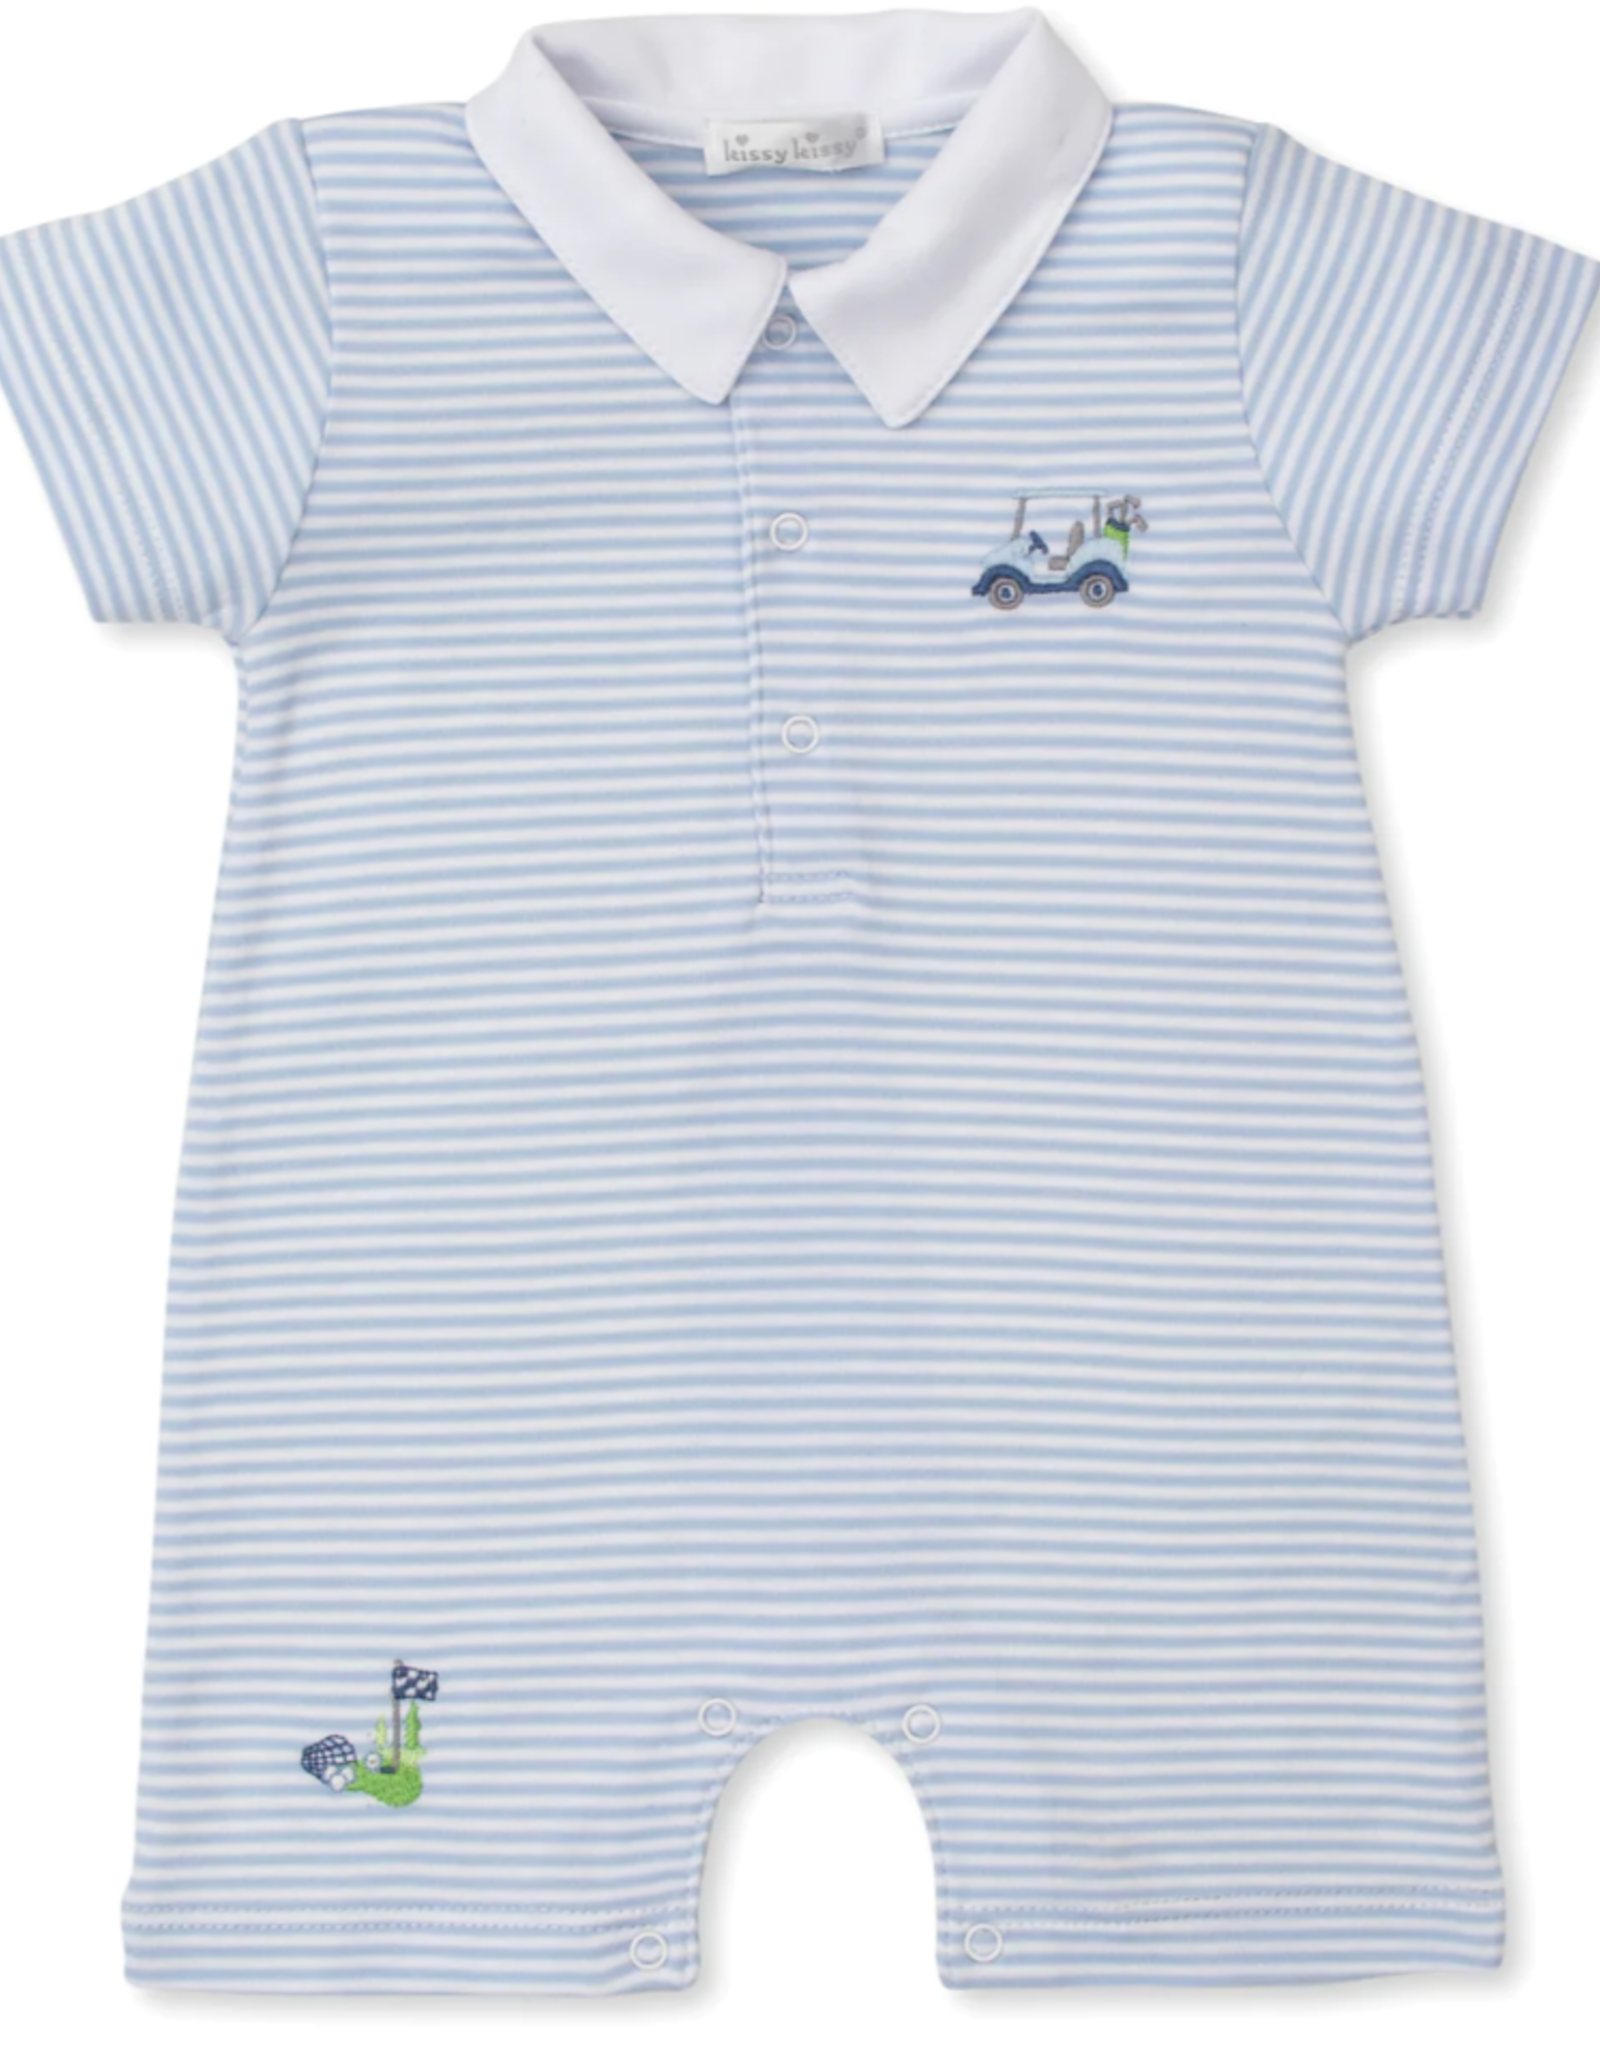 Kissy Kissy Light Blue Golf Cart Embroidered Playsuit